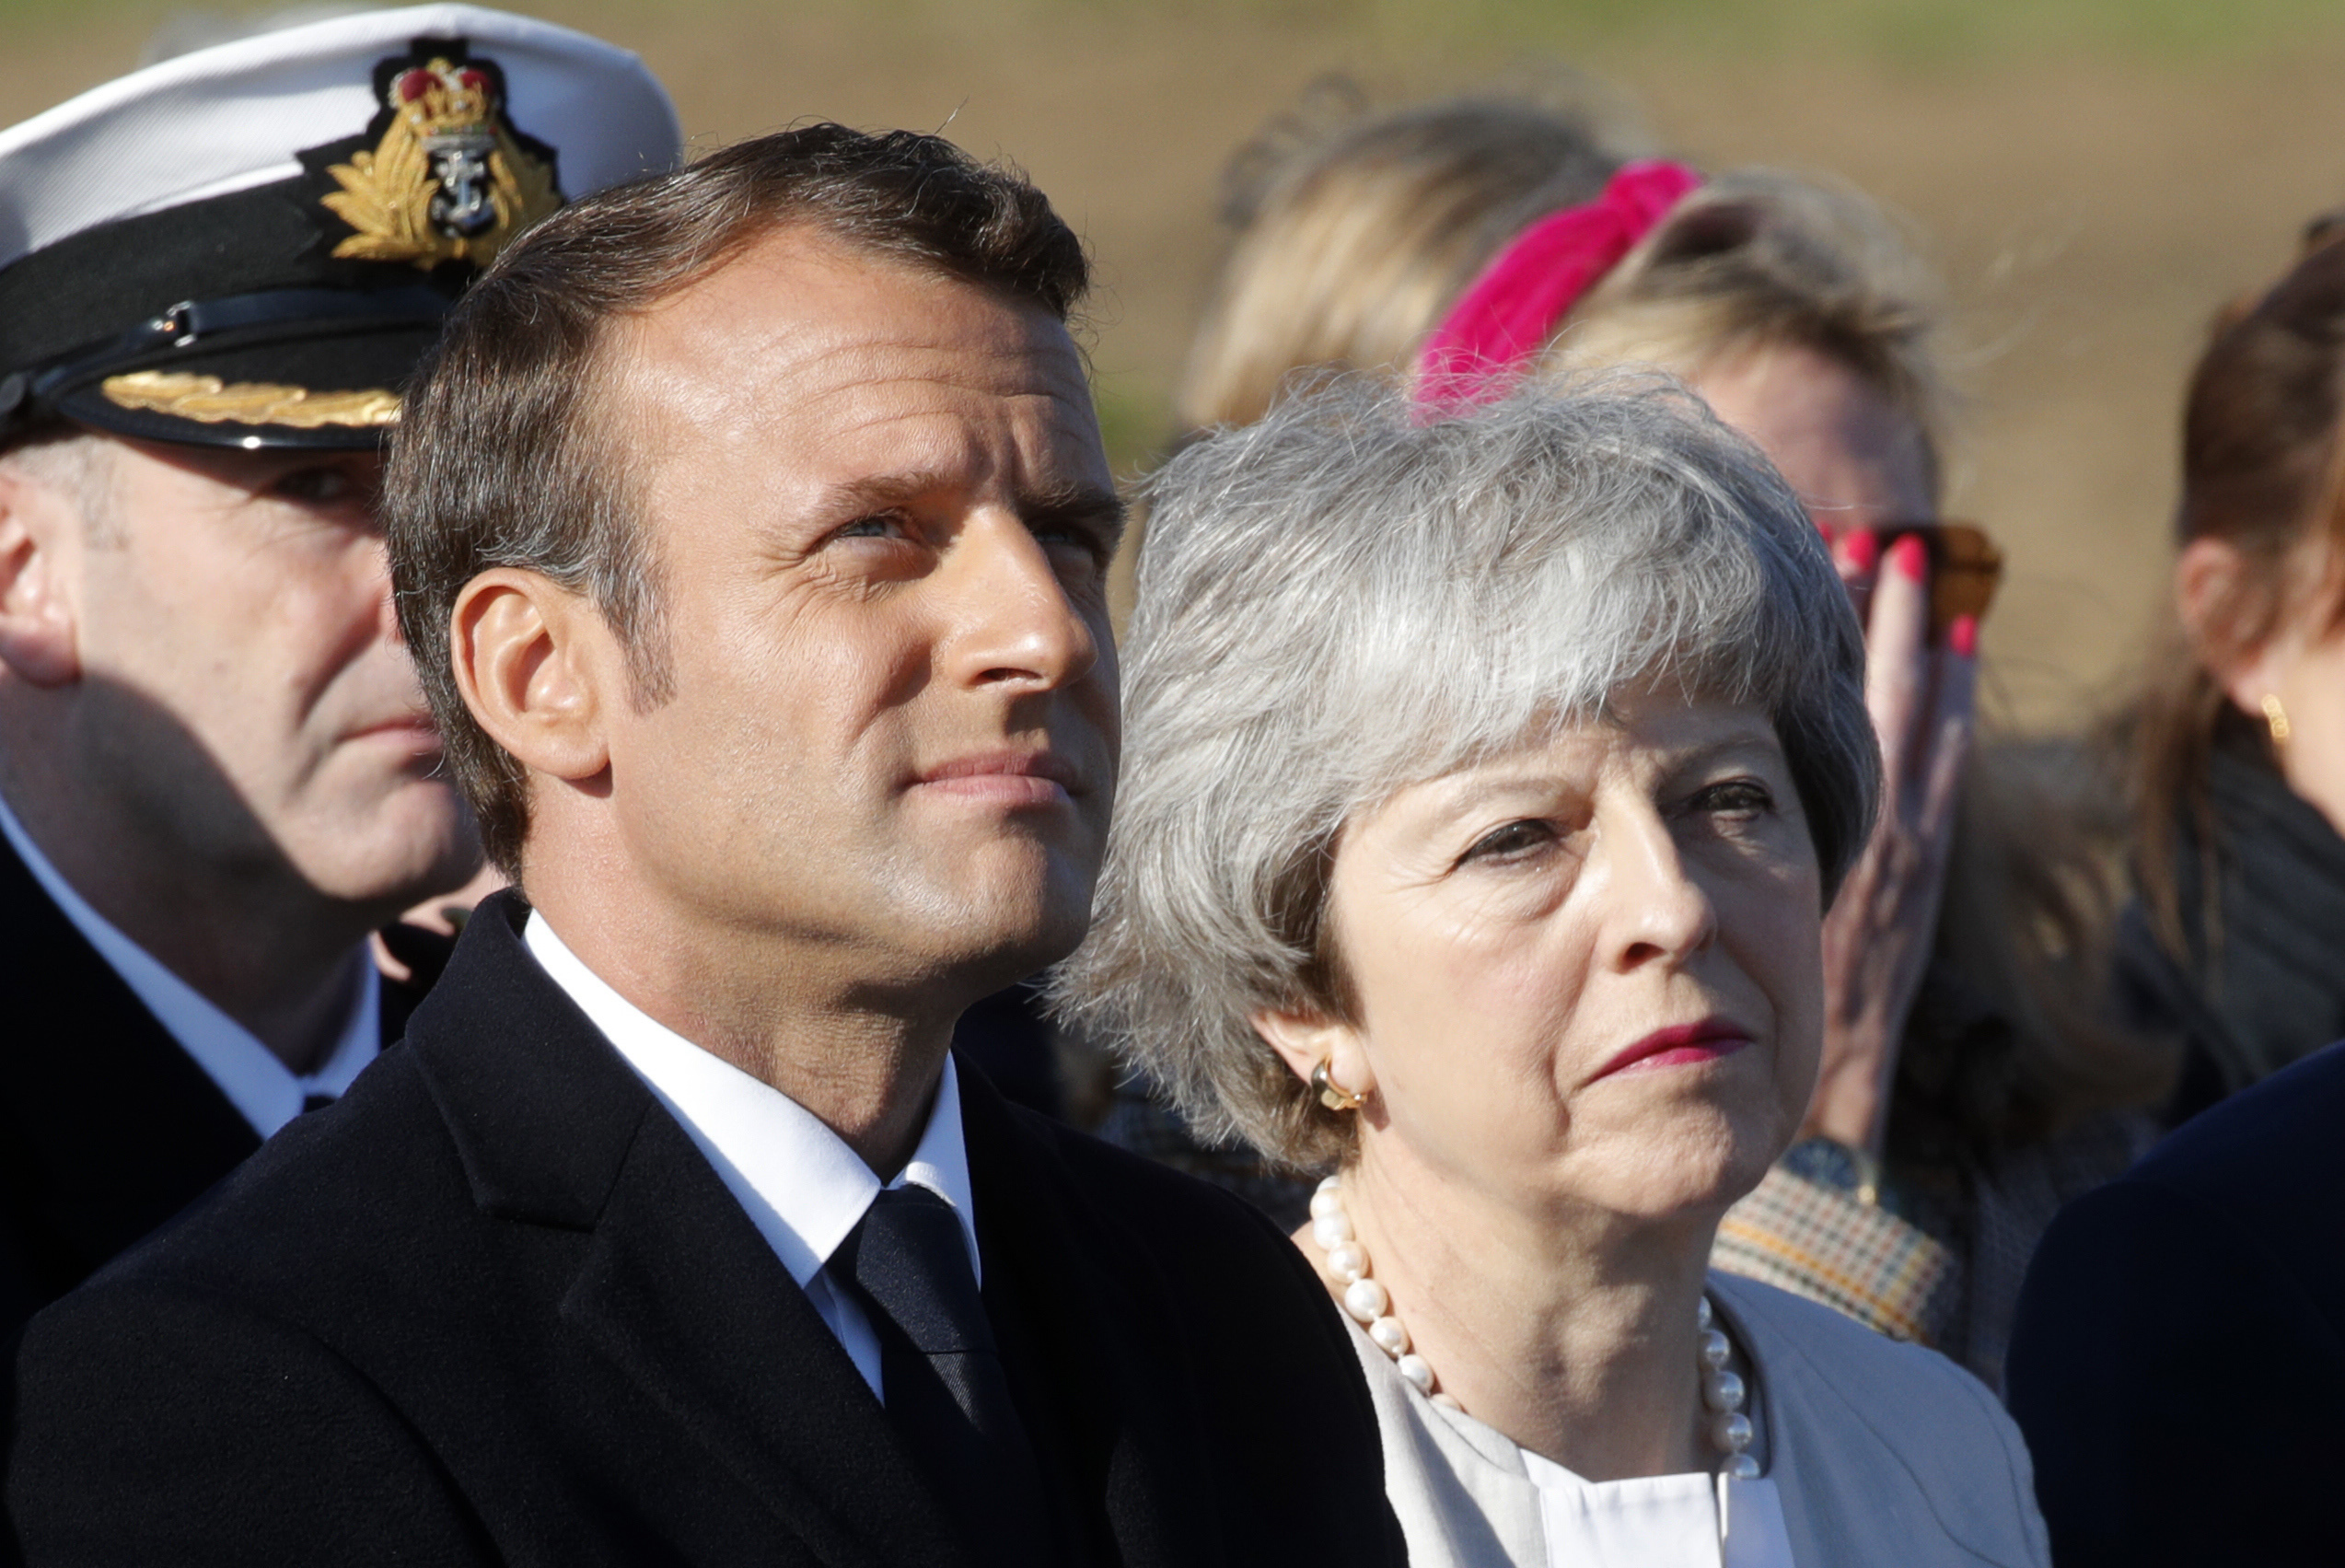 PHOTO: British Prime Minister Theresa May and French President Emmanuel Macron attend a Franco-British ceremony to mark the 75th anniversary of D-Day landings.